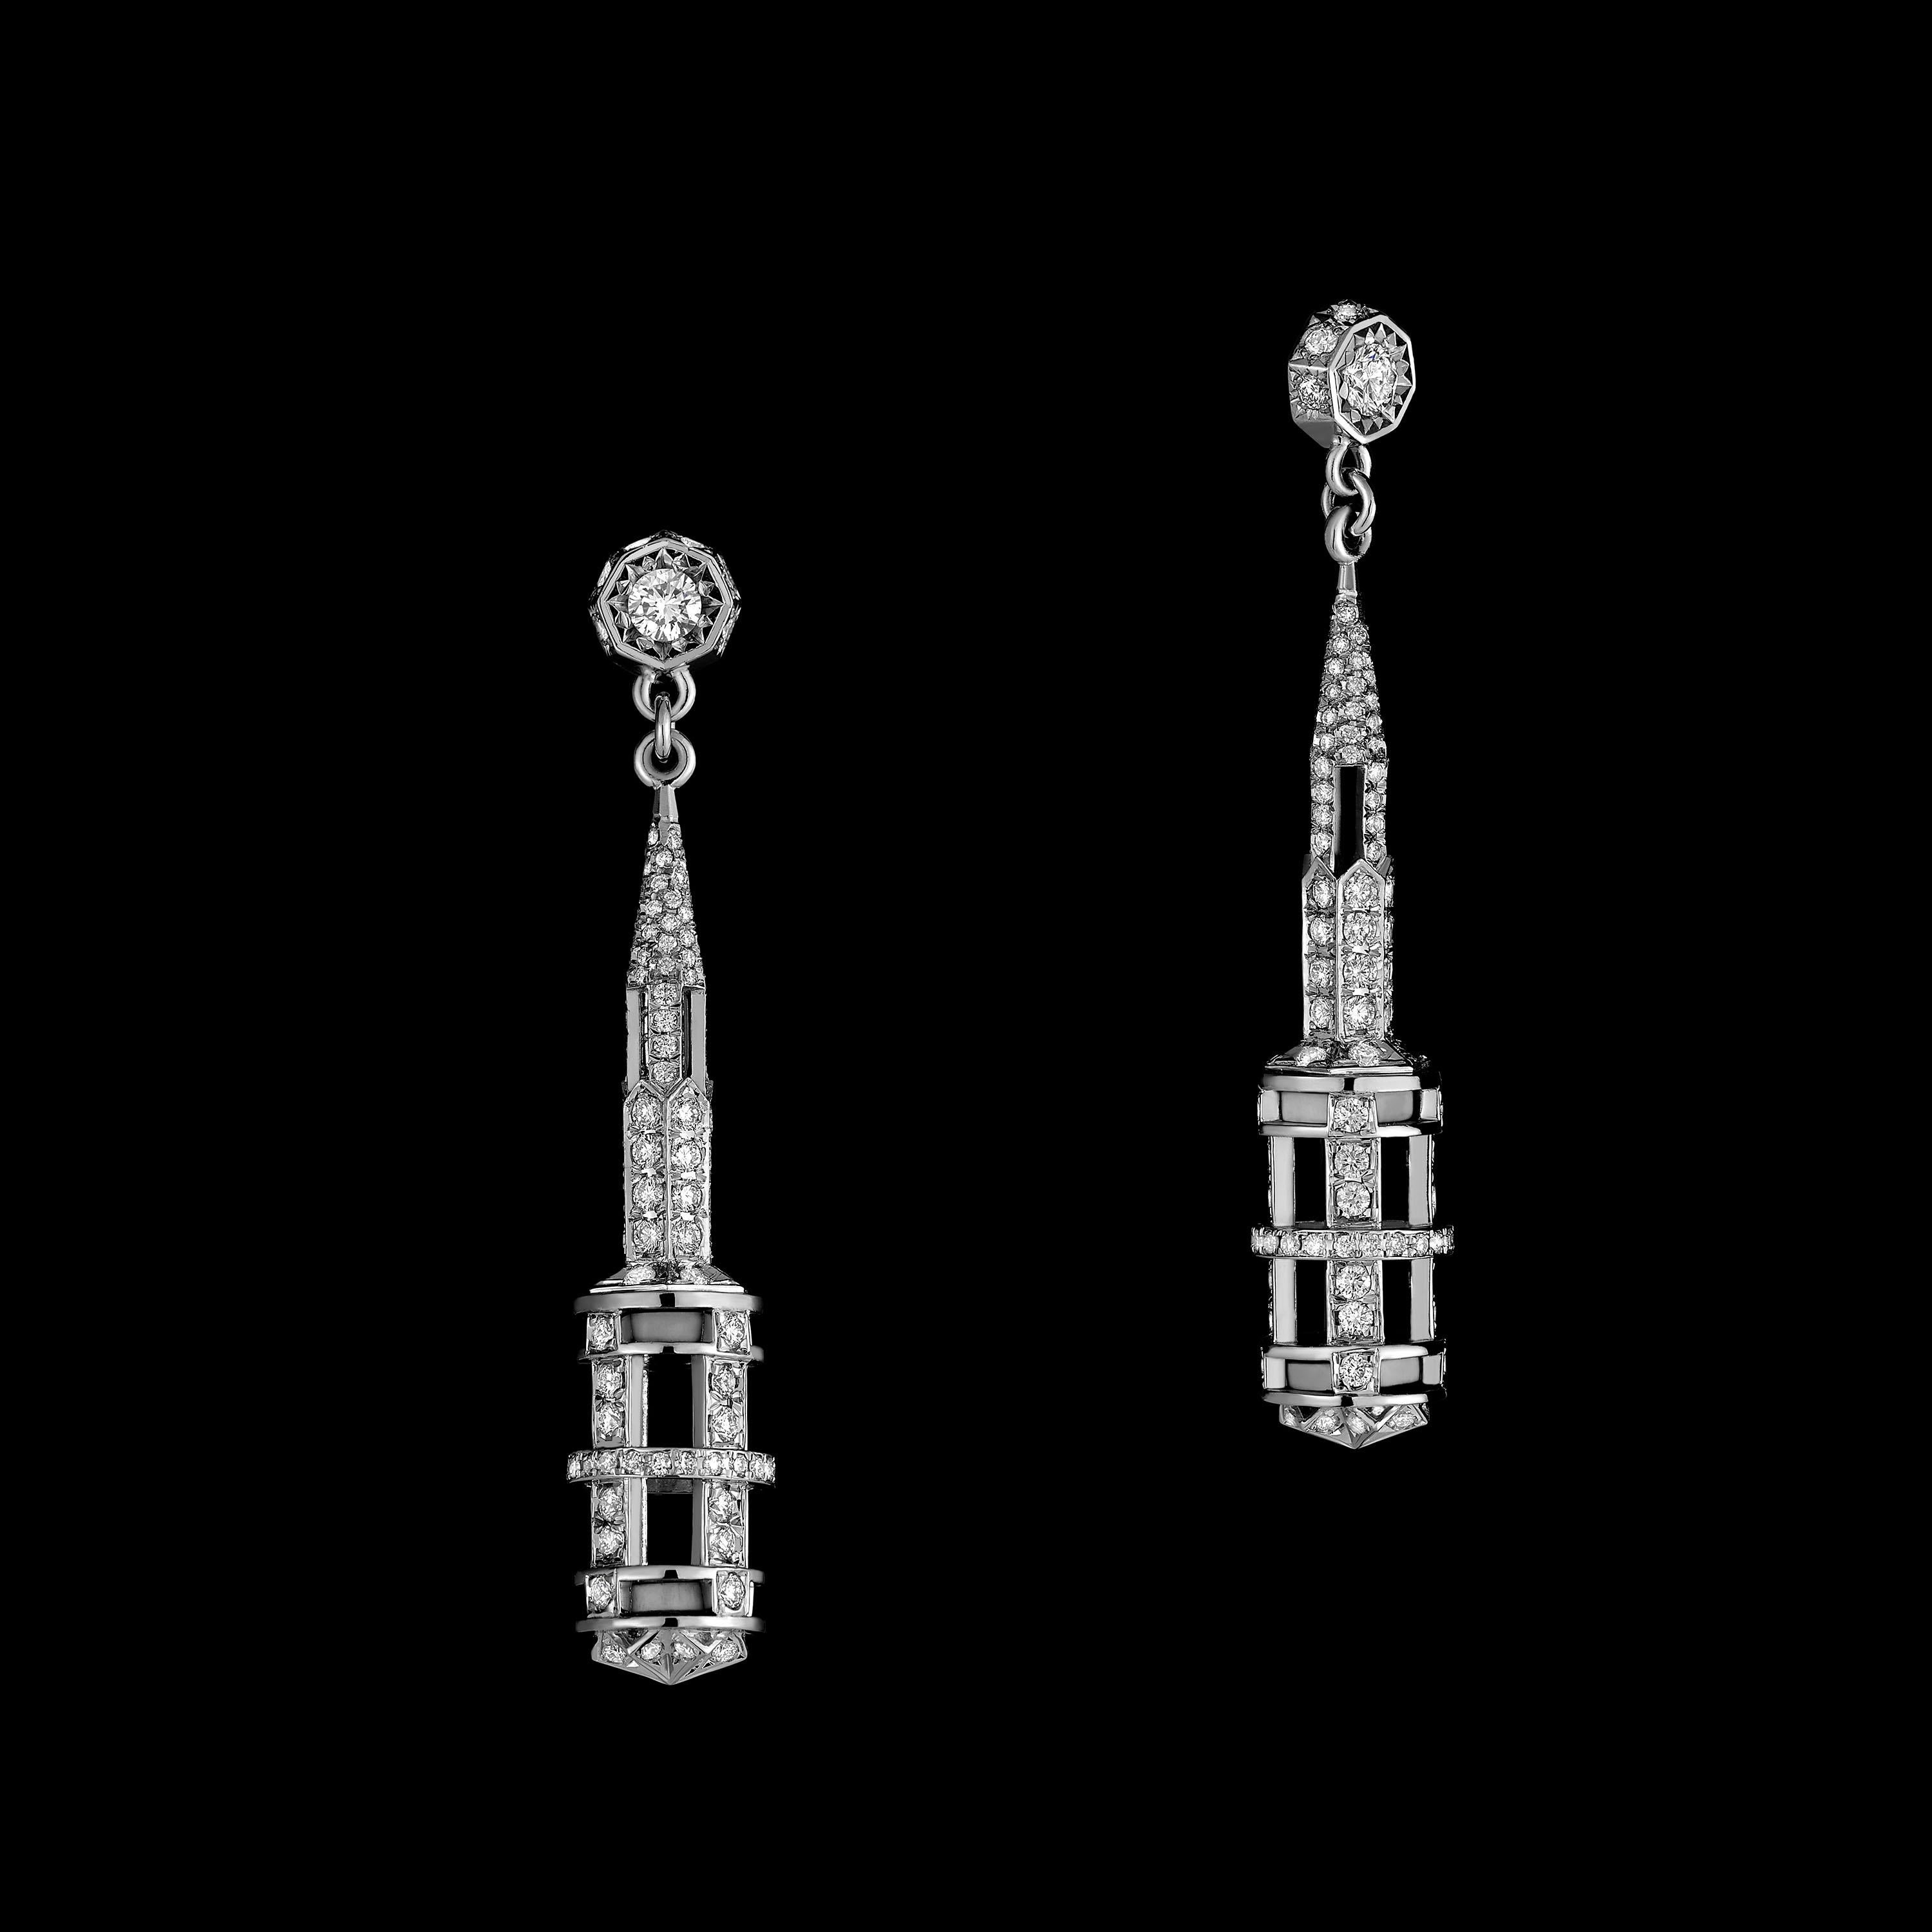 Architectural earrings in 19K gold and platinum, set with diamonds and fossilized mammoth ivory. Elegant example of high end designer creation.

Tender sensitivity of the feminine and the architectural strength of the masculine. Inspired by Ulmer